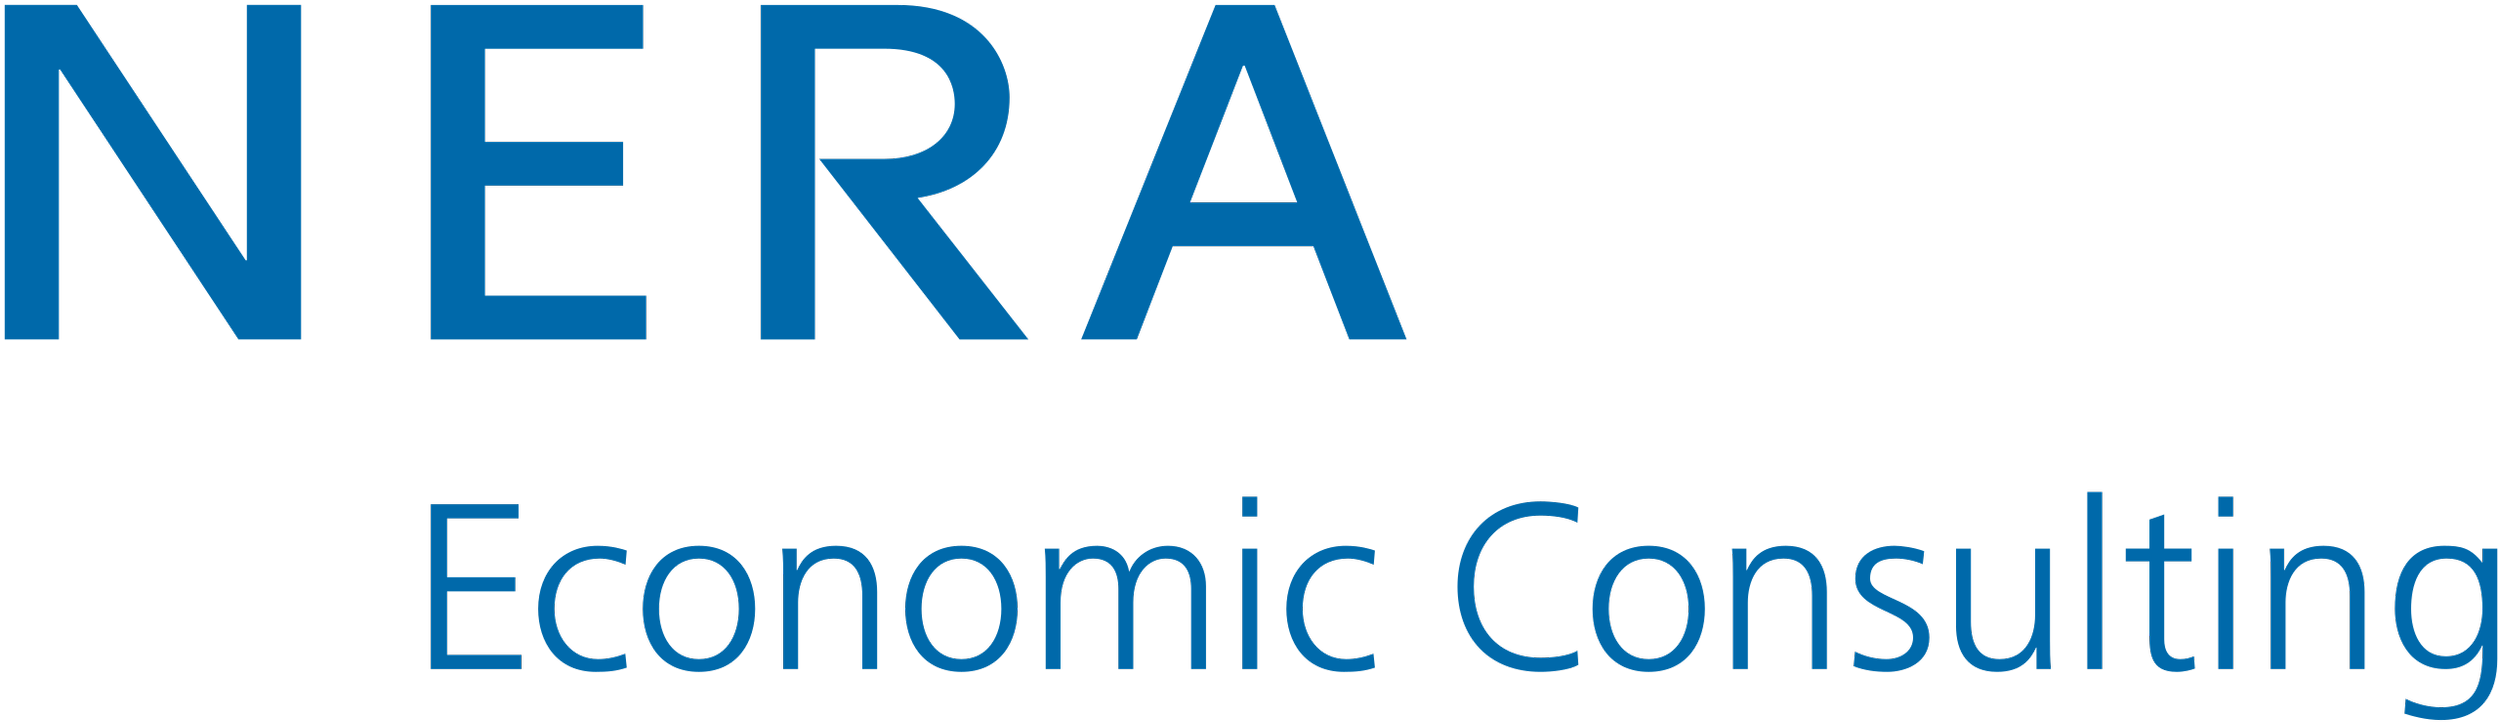 NERA_Economic_Consulting_Logo.svg.png